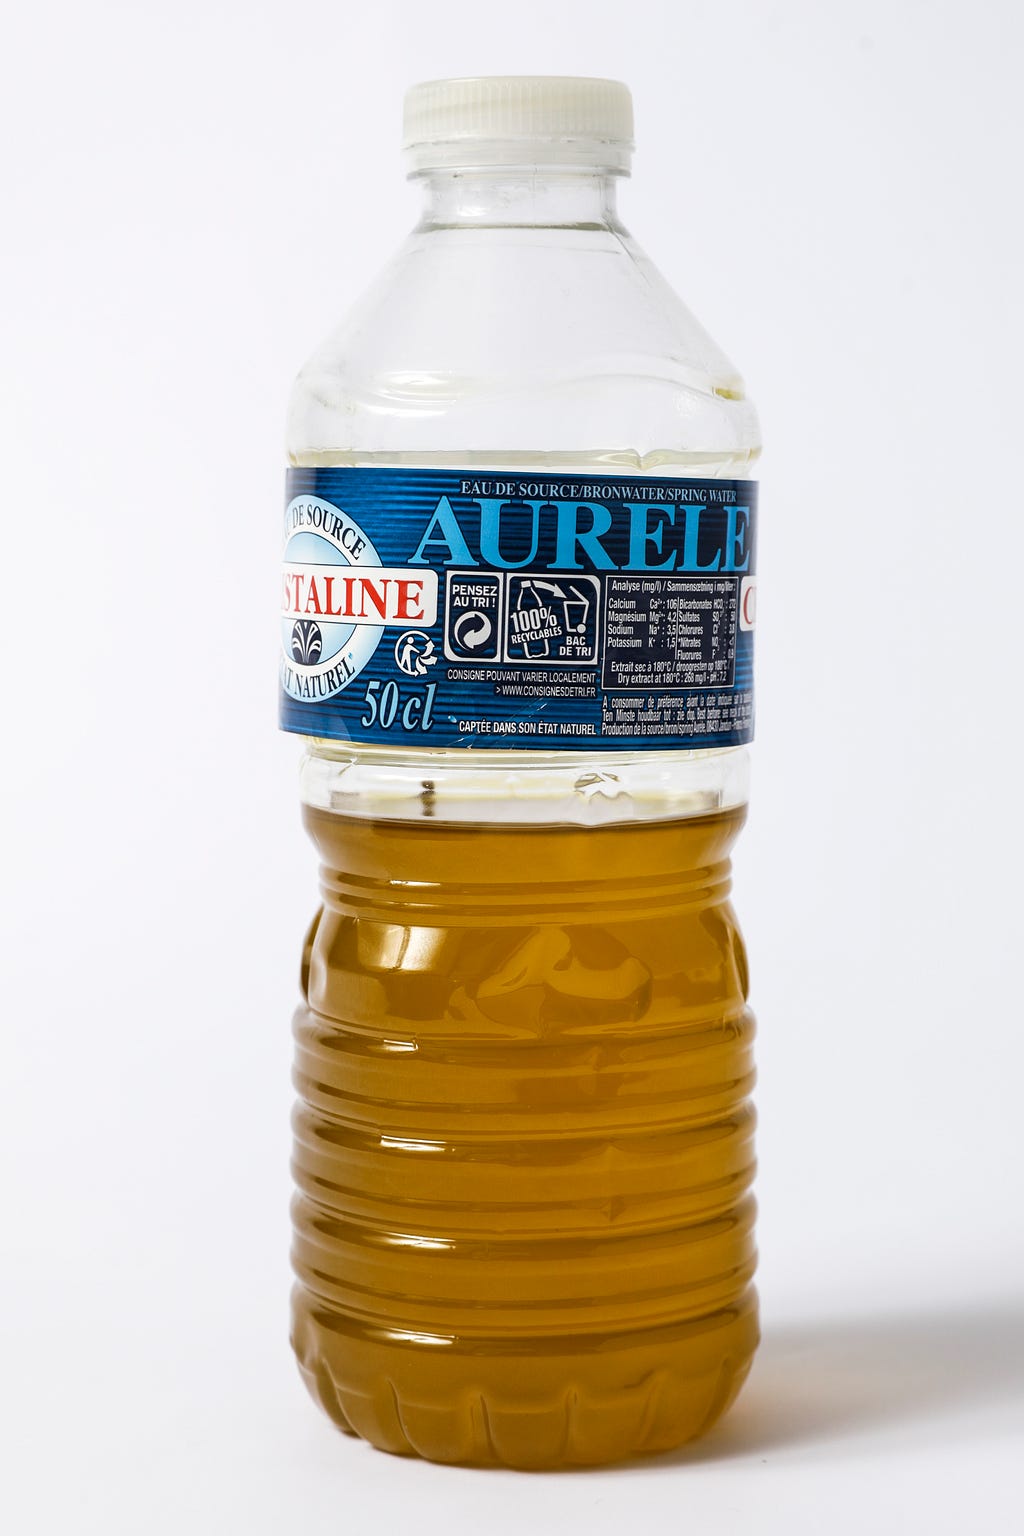 A plastic bottle containing Tunisian olive oil